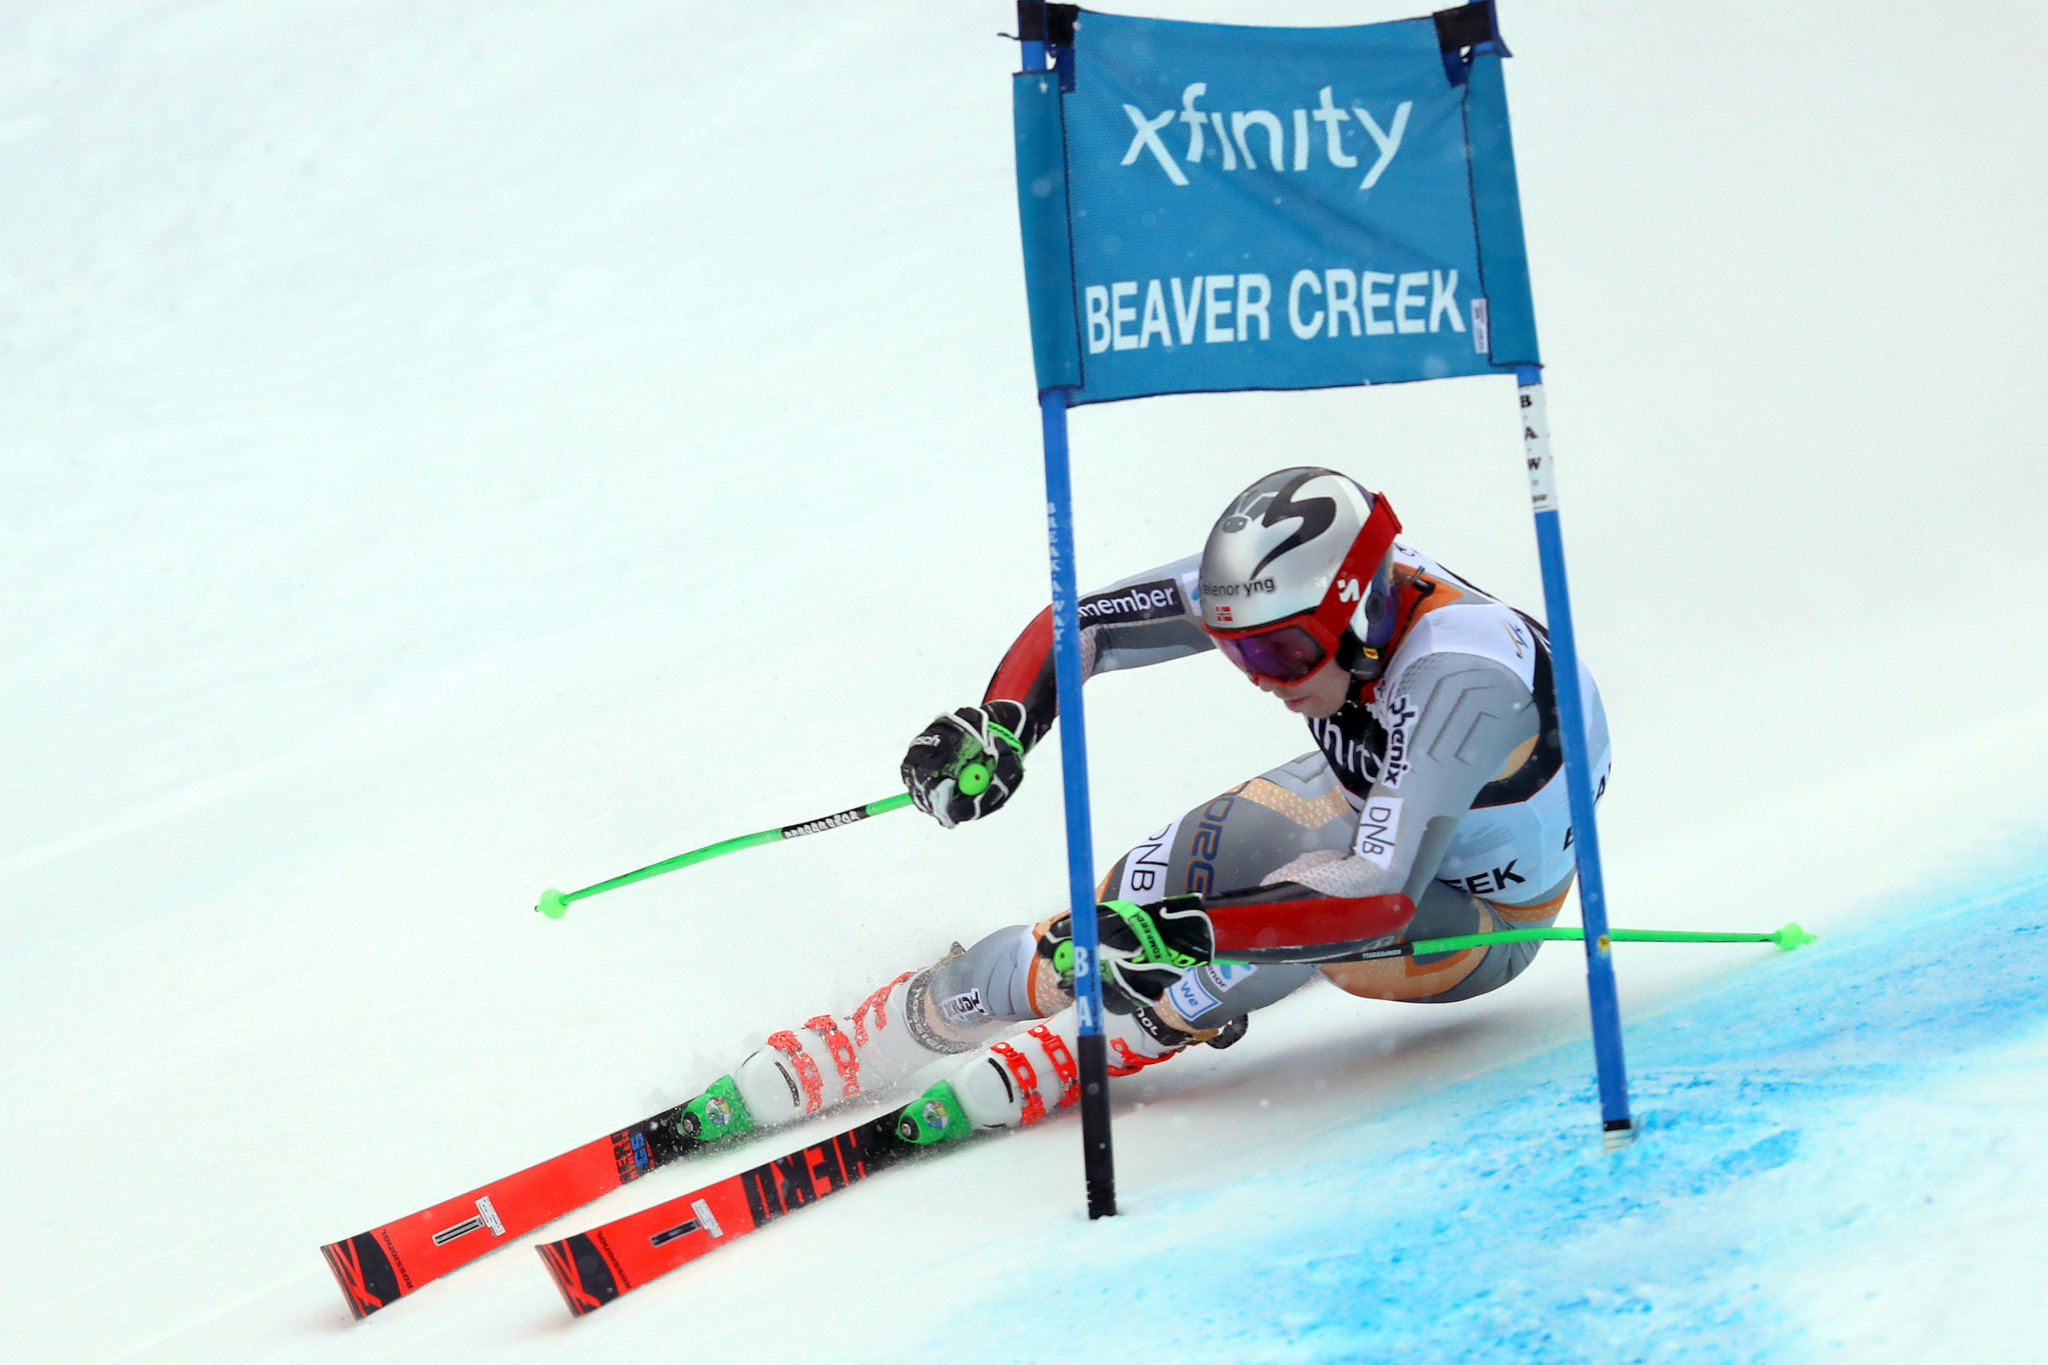 Men's super-G, downhill and giant slalom contests had been scheduled in Beaver Creek ©Getty Images